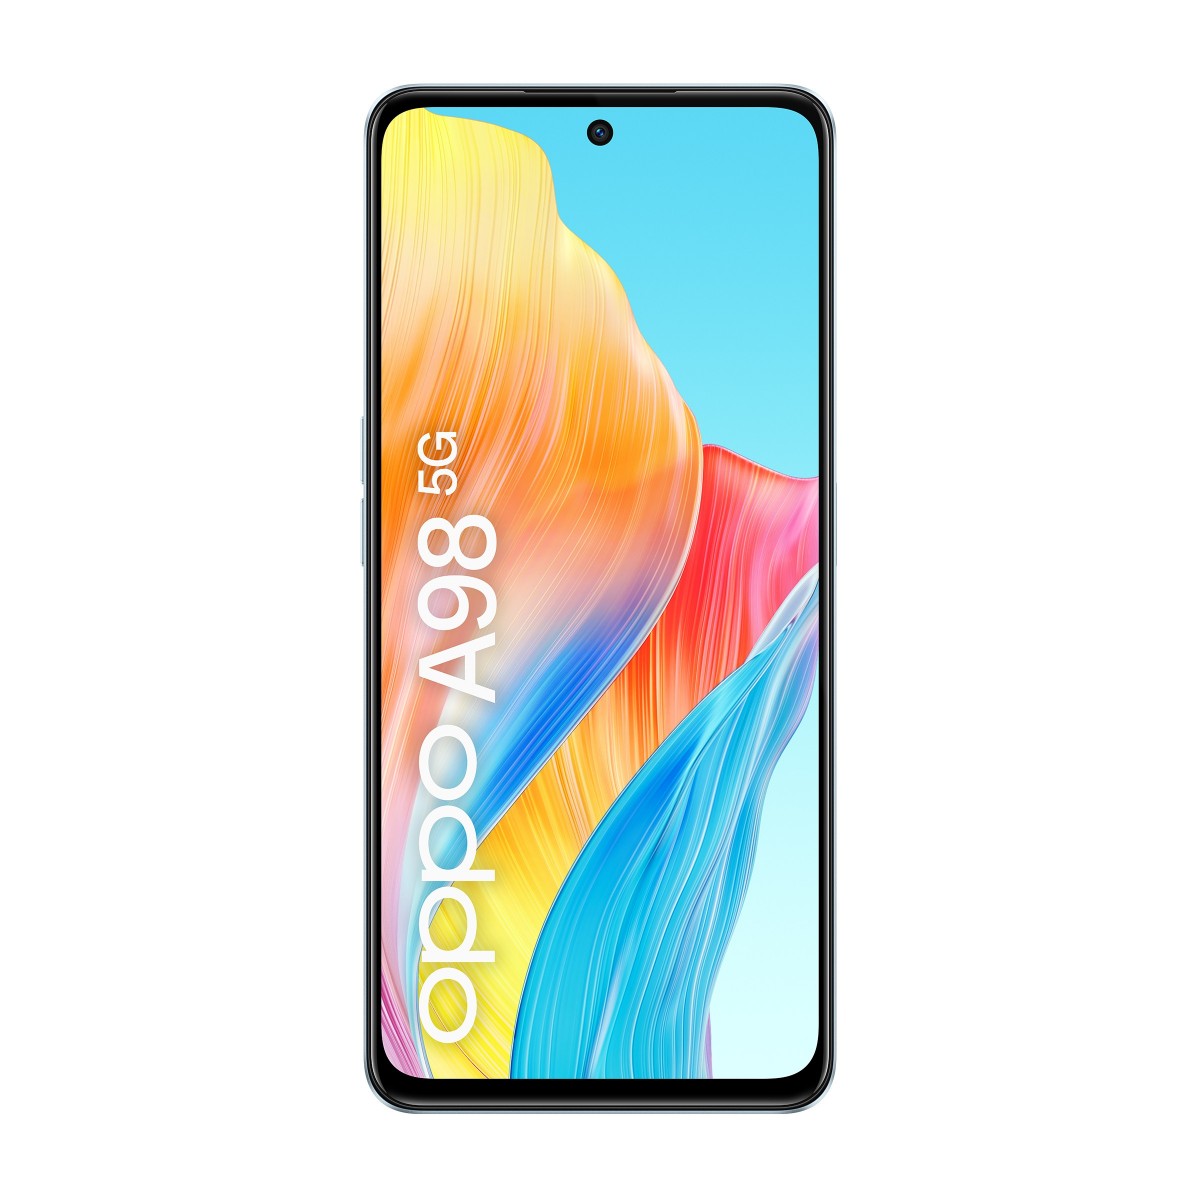 Oppo A98 5G  - 17,1 cm (6.72 Zoll) - 8 GB - 256 GB - 64 MP - Android 13 - Blau